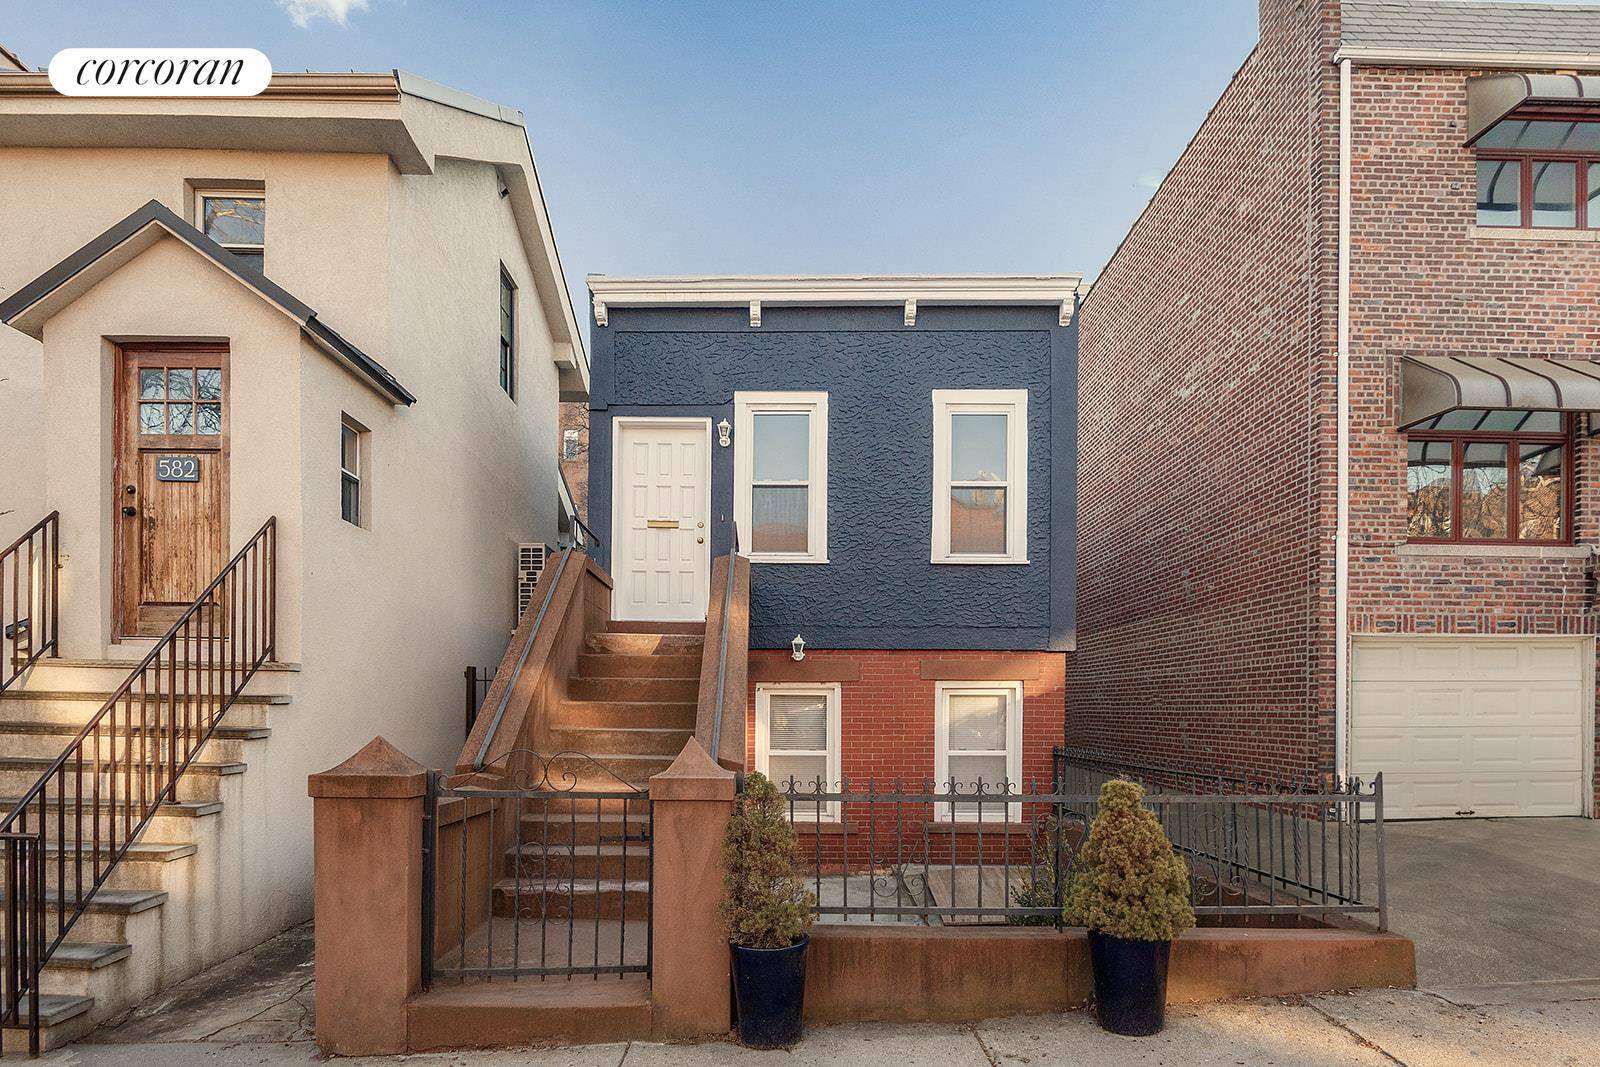 Nestled between two beloved Brooklyn green spaces, Prospect Park and Greenwood Cemetery, 578 20th Street is the quintessential location you think of when you think of home.